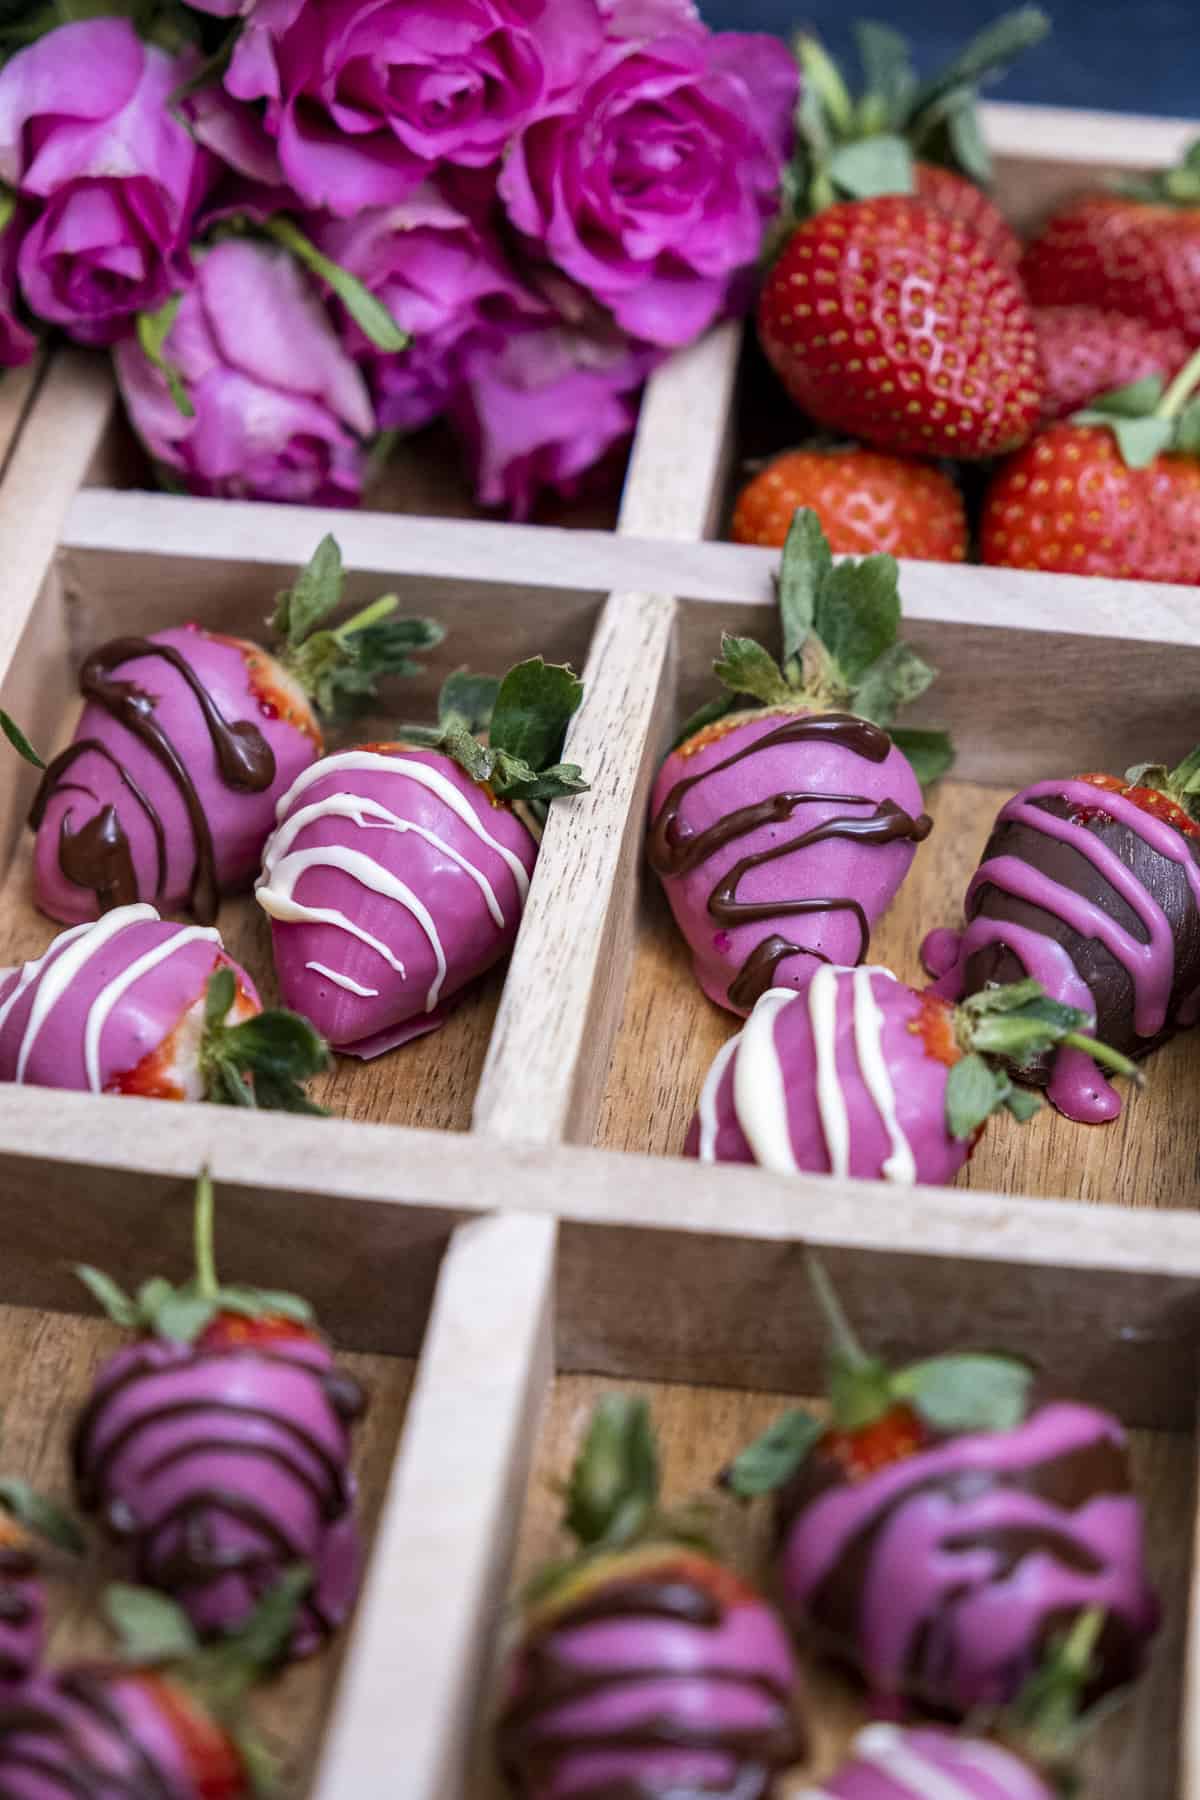 Pink chocolate strawberries in a wooden box with sections, pink roses and strawberries behind these.